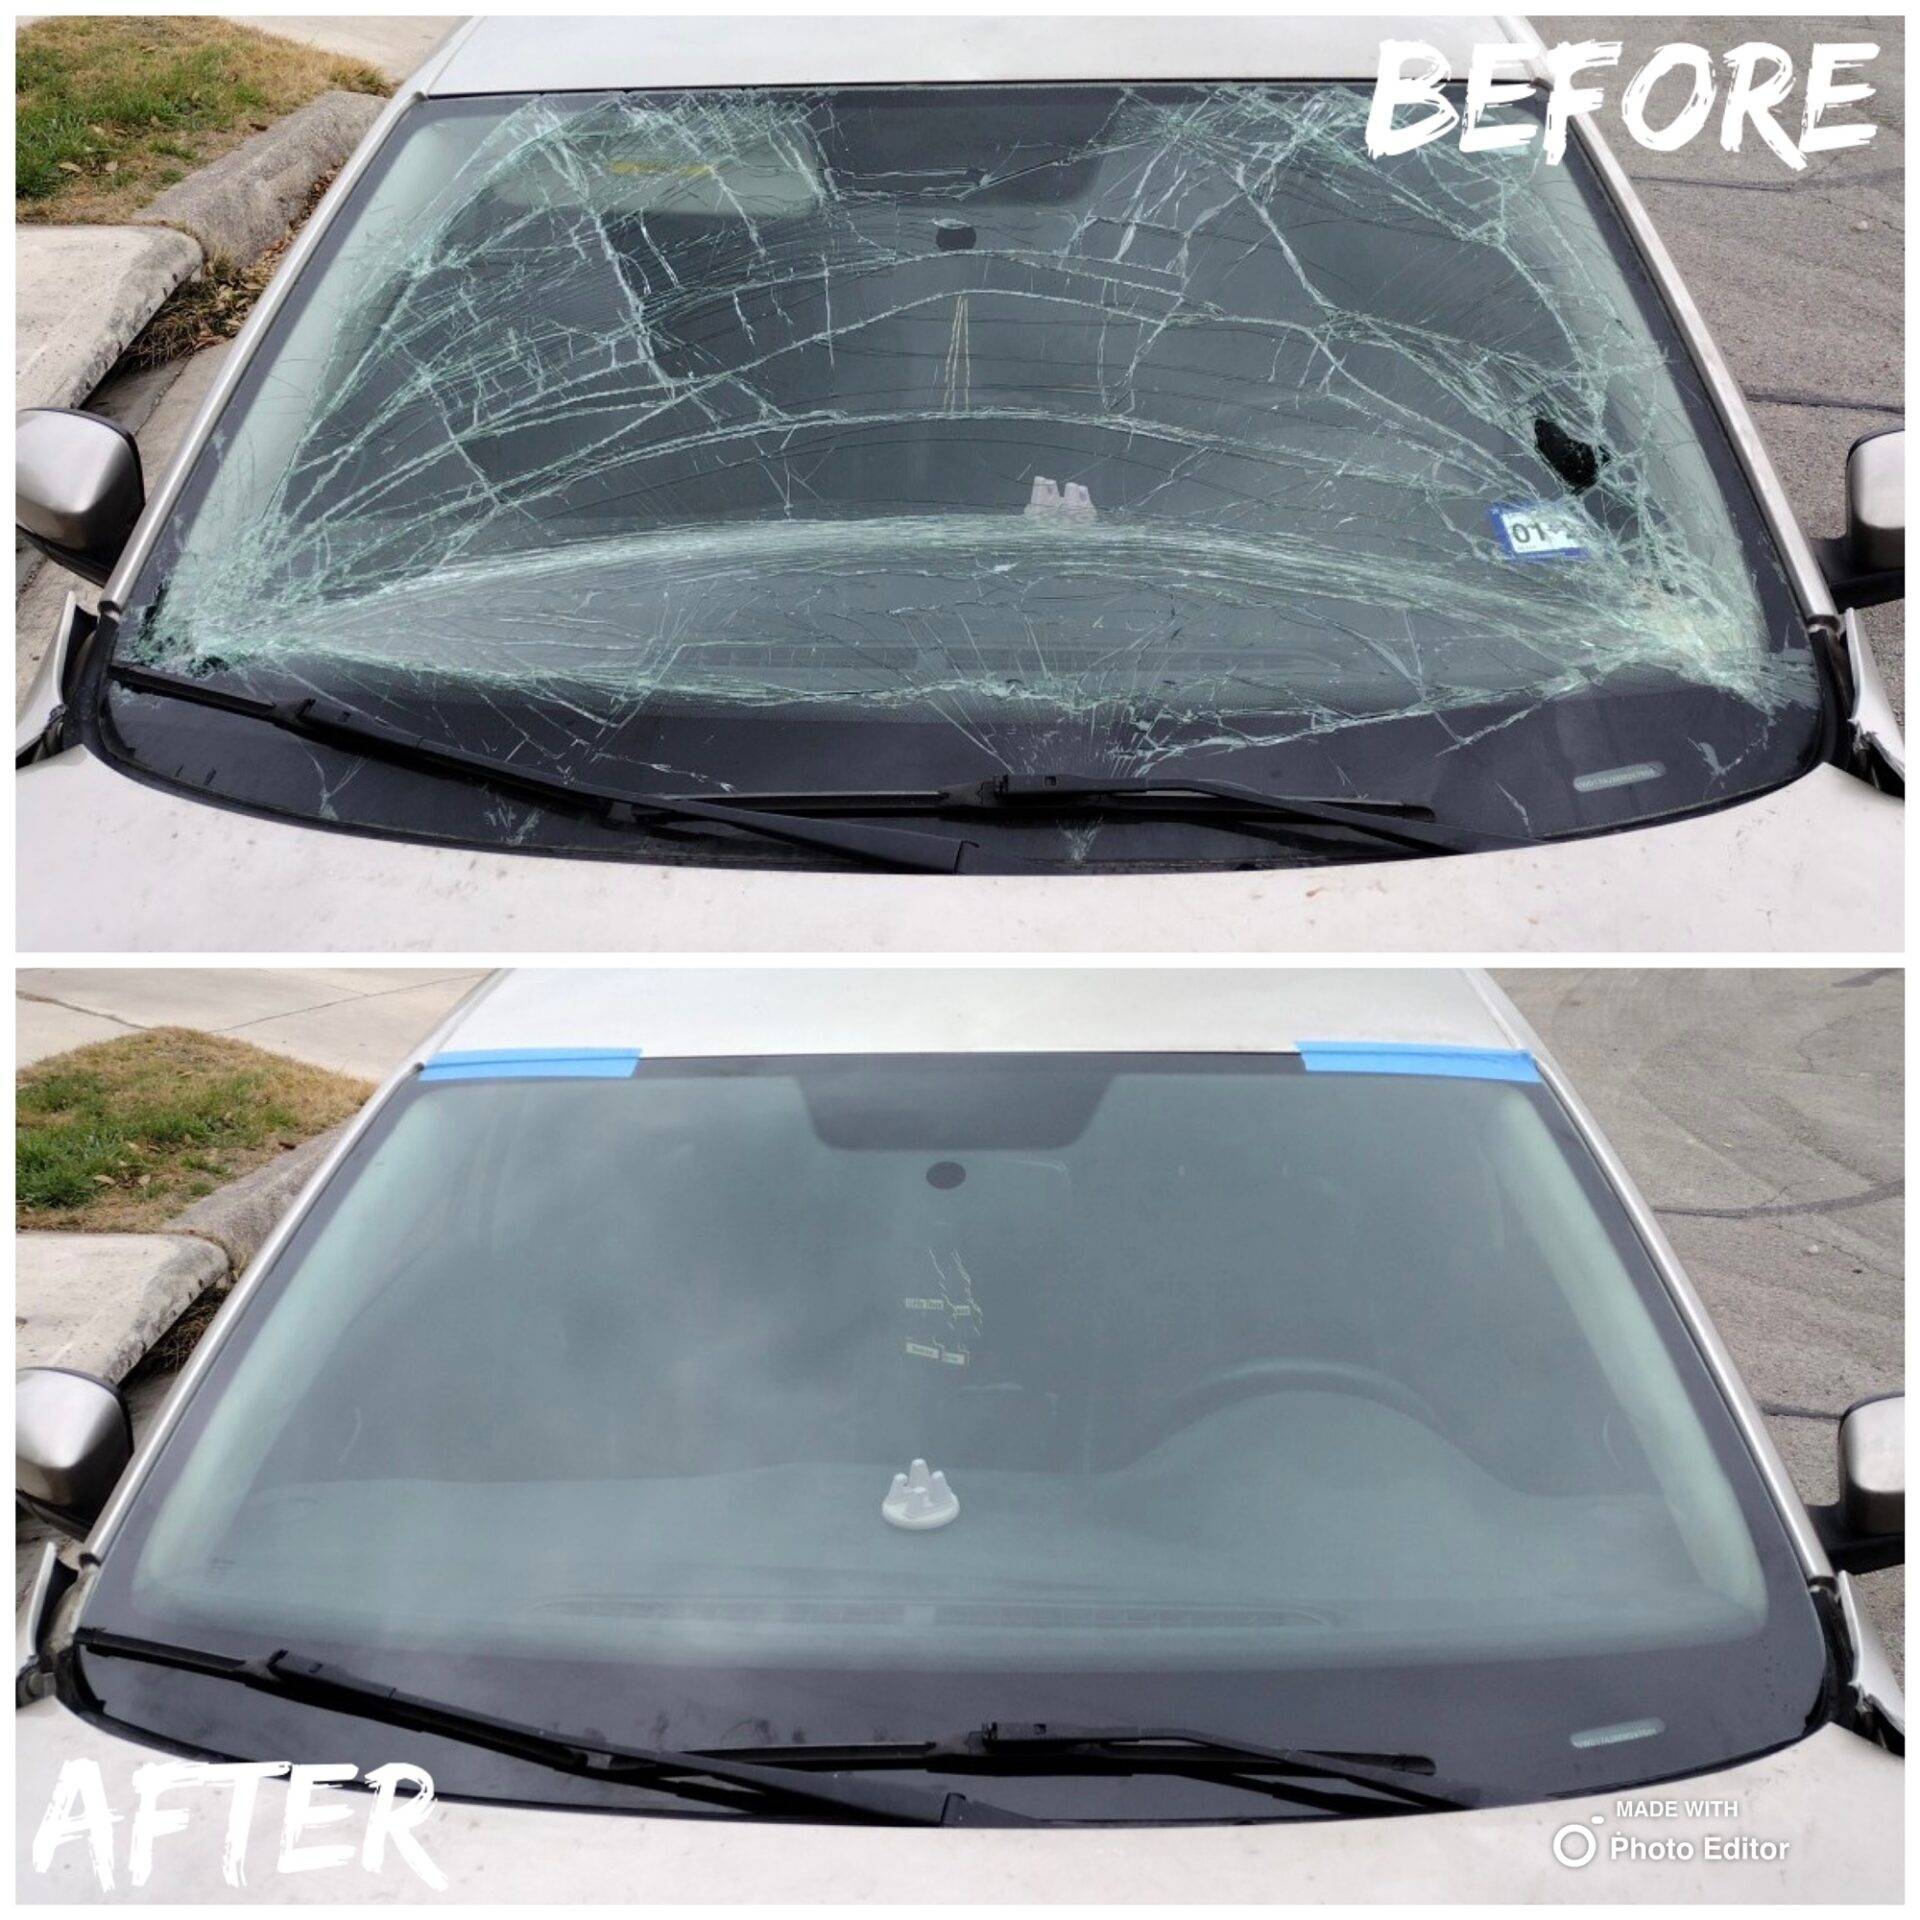 Before and after split-screen image: top shows smashed front windshield on a sedan, bottom displays new windshield installed in Selma, Texas.